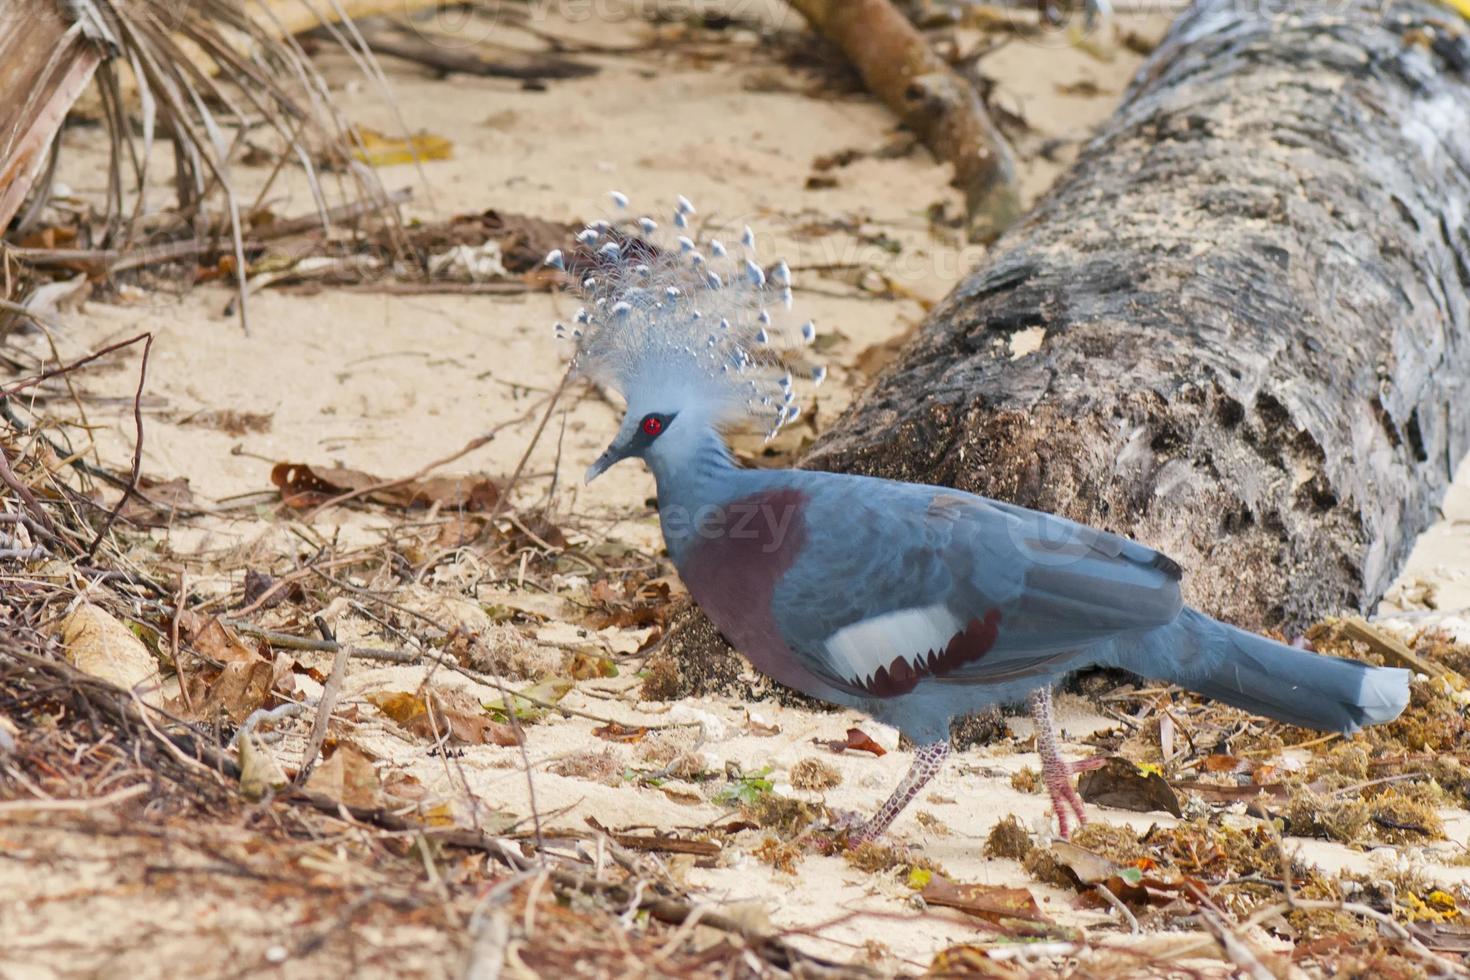 exotic blue pigeon on the beach photo